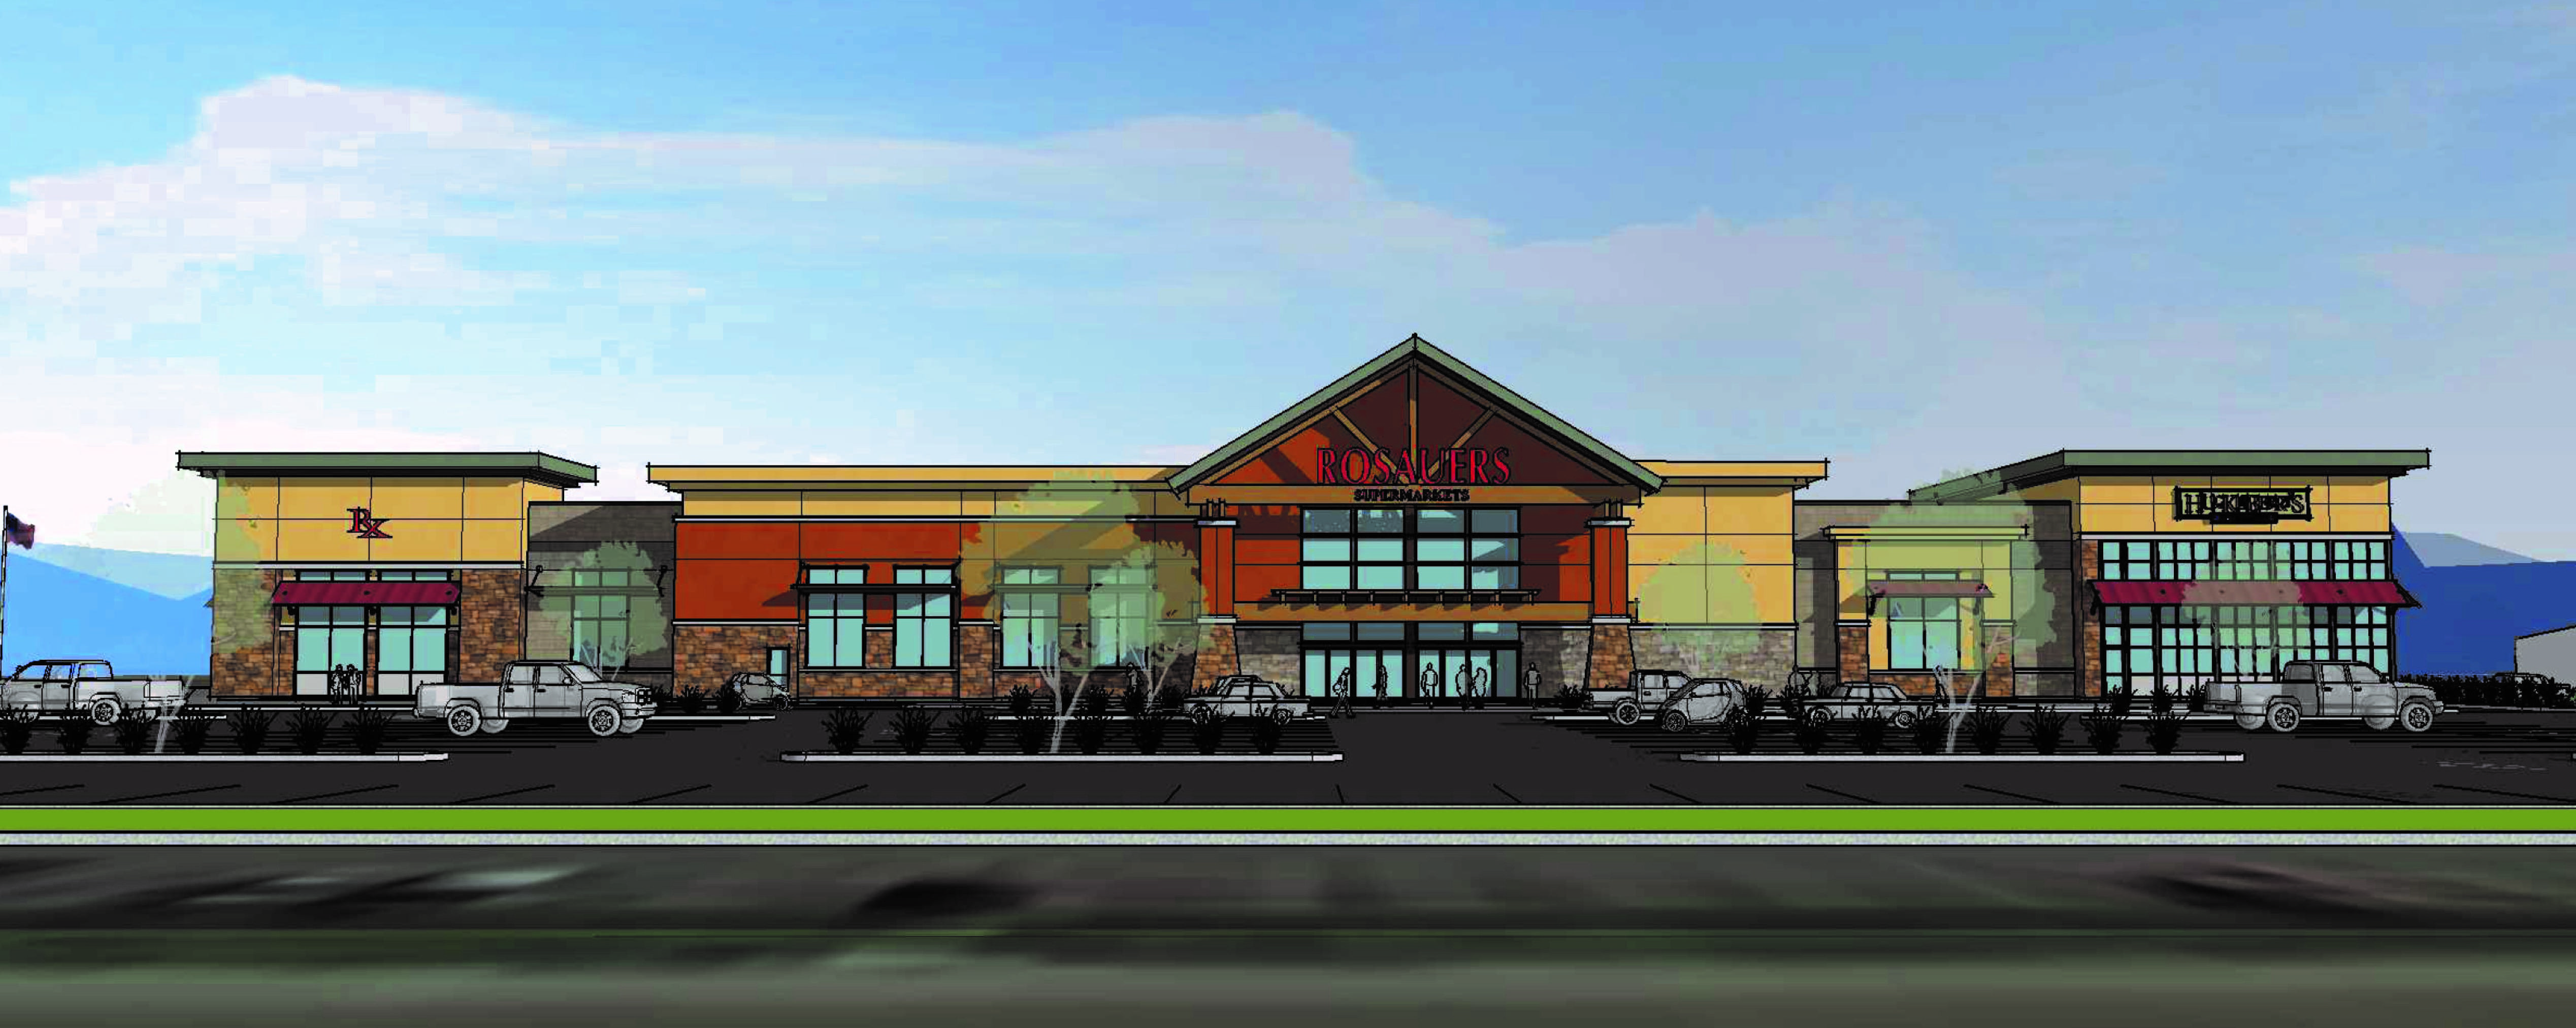 A Rosauers grocery is planned for a development at the Port of Ridgefield.